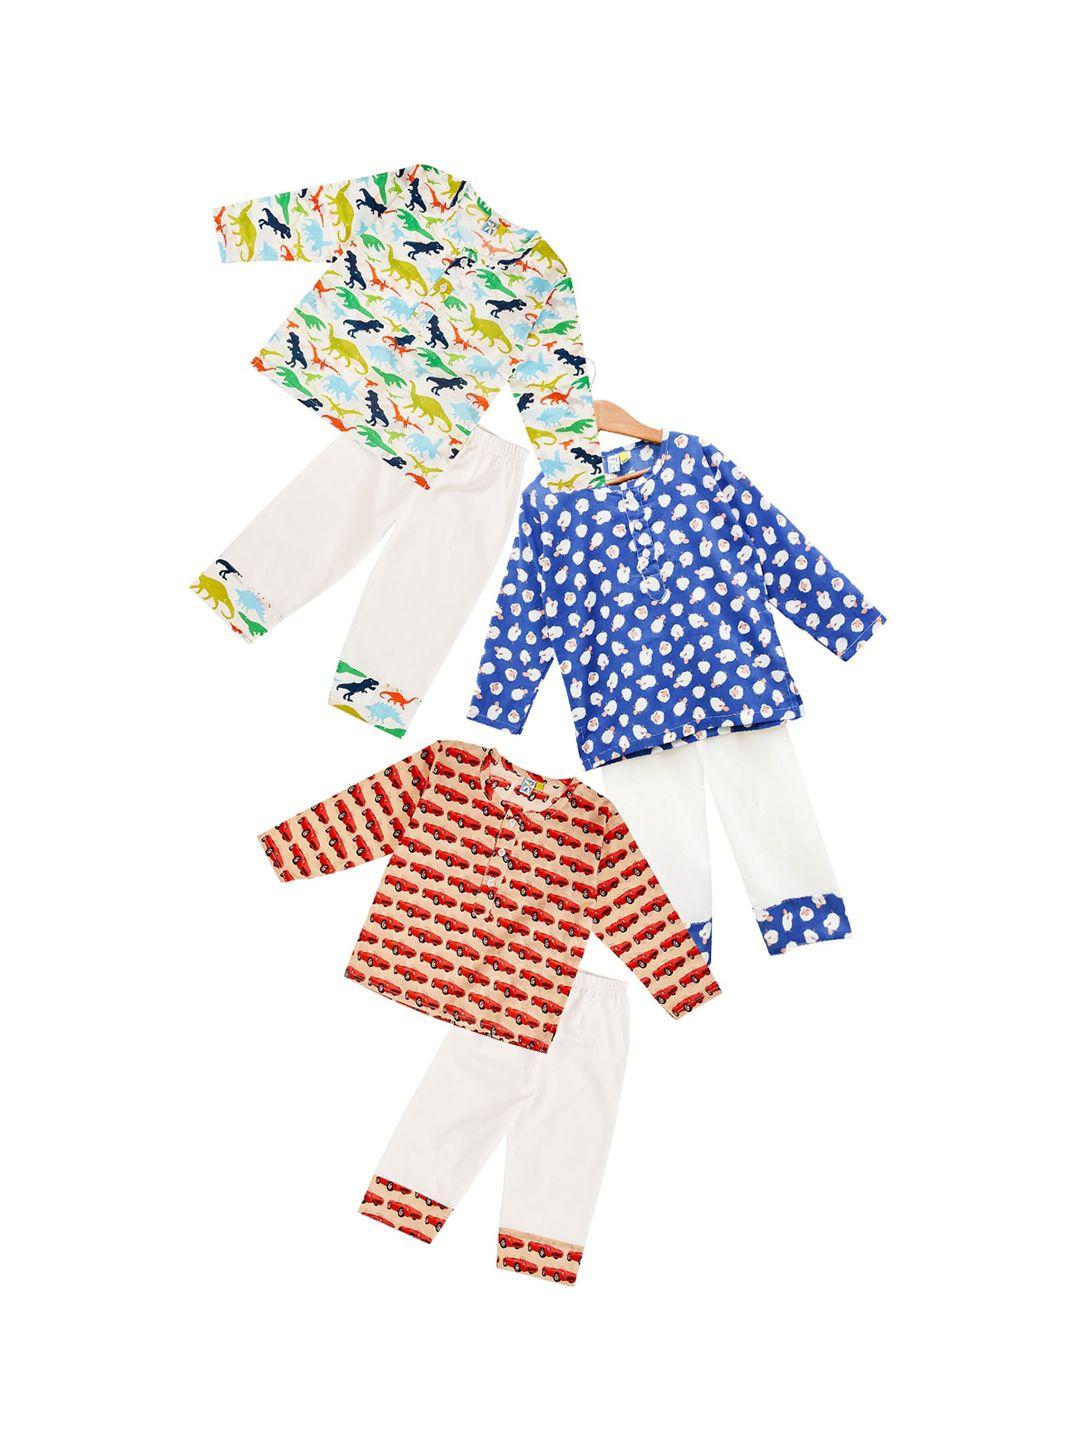 frangipani boys pack of 3 green & blue conversational printed pure cotton night suit